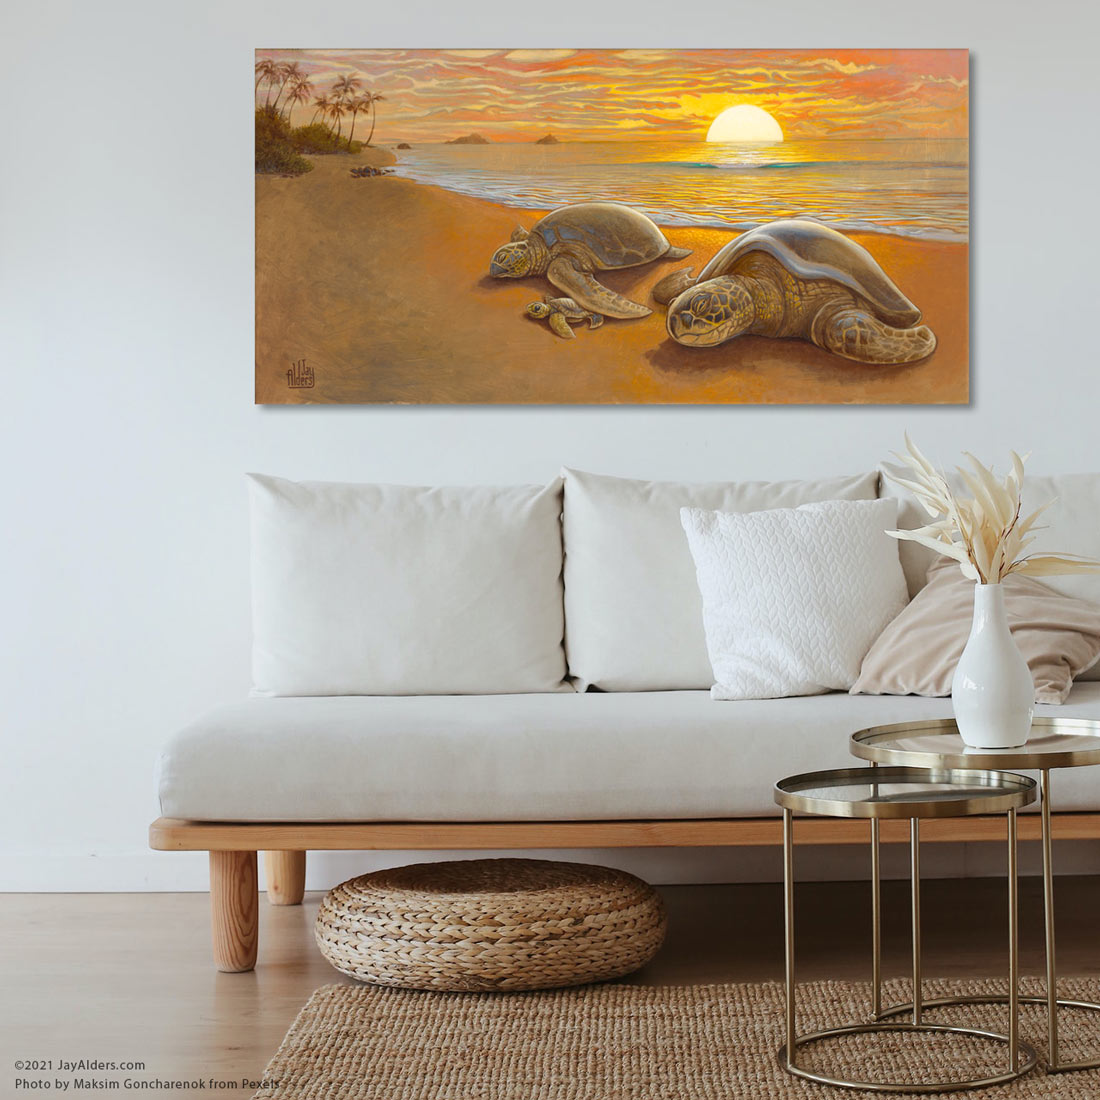 Sunset in Hawaii with a family of Sea turtles - art print bv Jay Alders